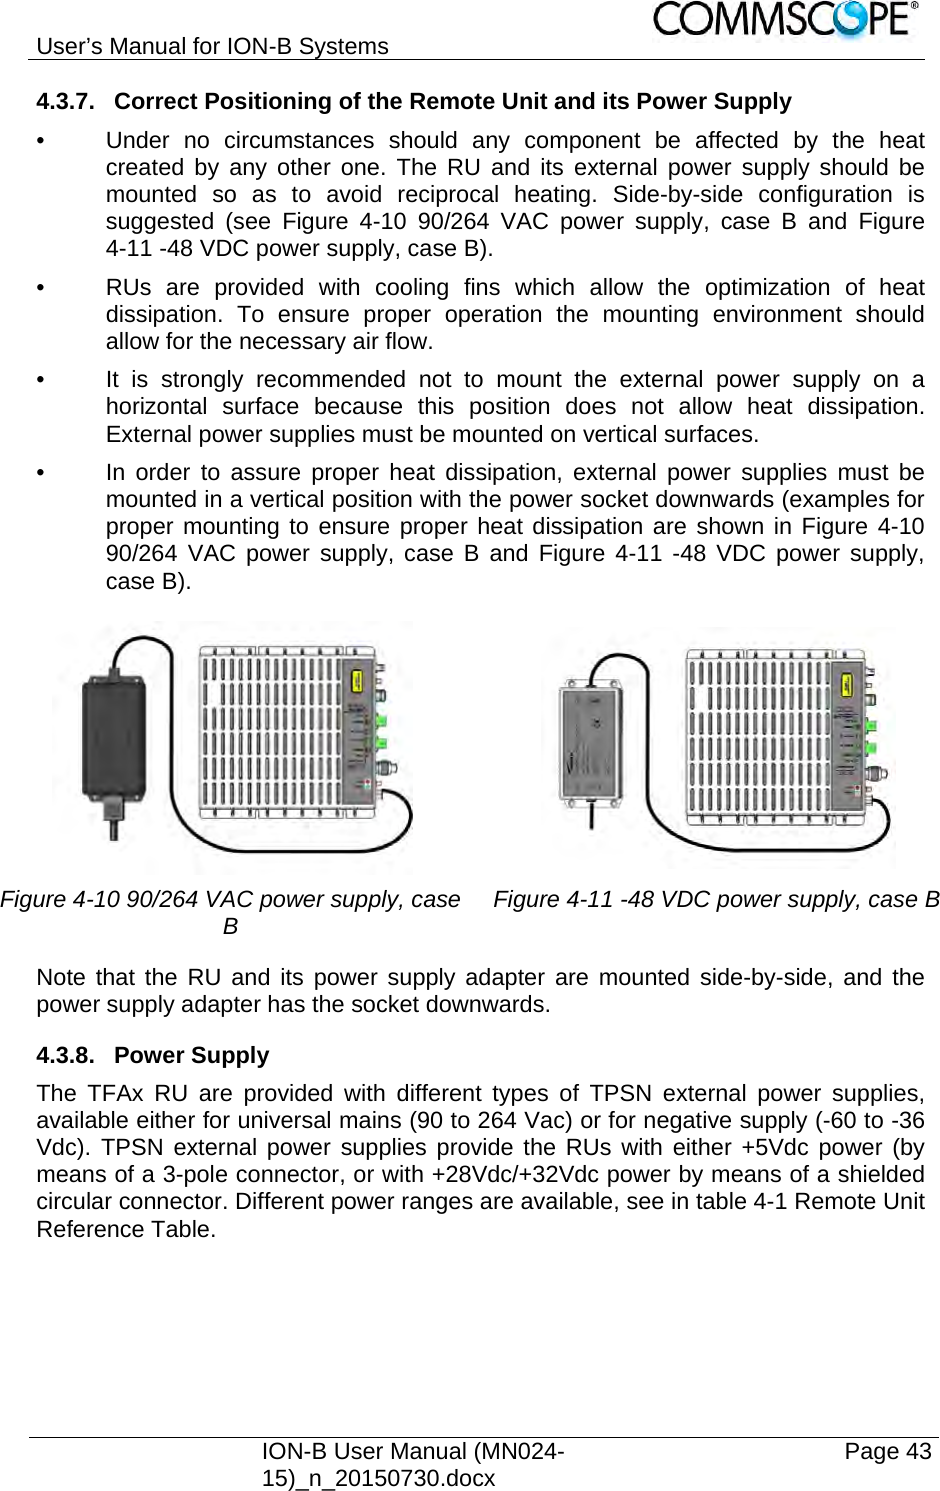 User’s Manual for ION-B Systems    ION-B User Manual (MN024-15)_n_20150730.docx  Page 43 4.3.7.  Correct Positioning of the Remote Unit and its Power Supply •  Under no circumstances should any component be affected by the heat created by any other one. The RU and its external power supply should be mounted so as to avoid reciprocal heating. Side-by-side configuration is suggested (see Figure 4-10 90/264 VAC power supply, case B and Figure 4-11 -48 VDC power supply, case B). •  RUs are provided with cooling fins which allow the optimization of heat dissipation. To ensure proper operation the mounting environment should allow for the necessary air flow. •  It is strongly recommended not to mount the external power supply on a horizontal surface because this position does not allow heat dissipation. External power supplies must be mounted on vertical surfaces. •  In order to assure proper heat dissipation, external power supplies must be mounted in a vertical position with the power socket downwards (examples for proper mounting to ensure proper heat dissipation are shown in Figure 4-10 90/264 VAC power supply, case B and Figure 4-11 -48 VDC power supply, case B).   Figure 4-10 90/264 VAC power supply, case B  Figure 4-11 -48 VDC power supply, case BNote that the RU and its power supply adapter are mounted side-by-side, and the power supply adapter has the socket downwards. 4.3.8. Power Supply The TFAx RU are provided with different types of TPSN external power supplies, available either for universal mains (90 to 264 Vac) or for negative supply (-60 to -36 Vdc). TPSN external power supplies provide the RUs with either +5Vdc power (by means of a 3-pole connector, or with +28Vdc/+32Vdc power by means of a shielded circular connector. Different power ranges are available, see in table 4-1 Remote Unit Reference Table.  